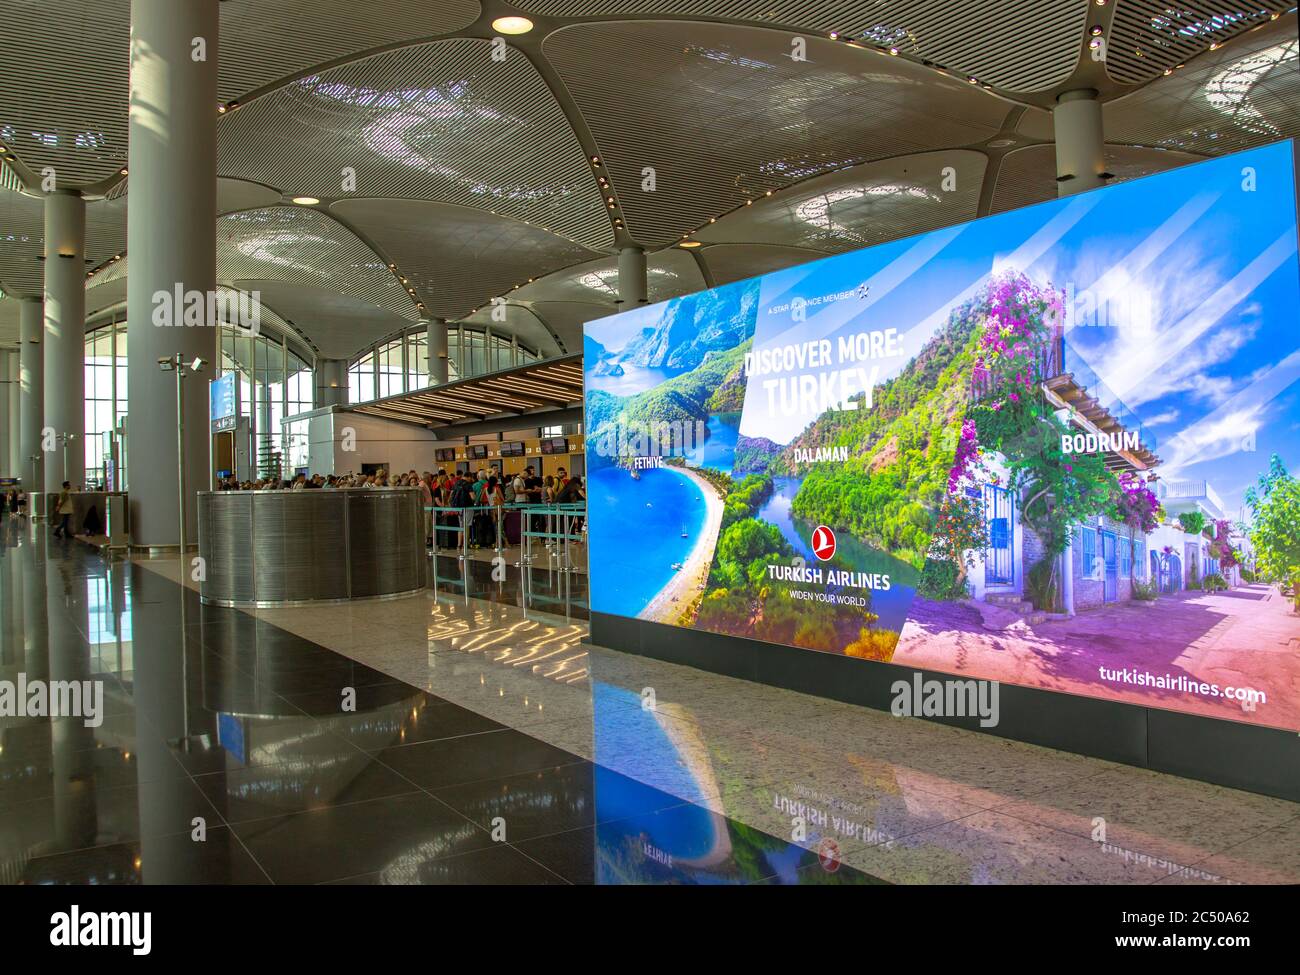 Istanbul, Turkey - August 07, 2019: Interior view of the Istanbul new airport. New Istanbul Airport is the main international airport located in Istan Stock Photo